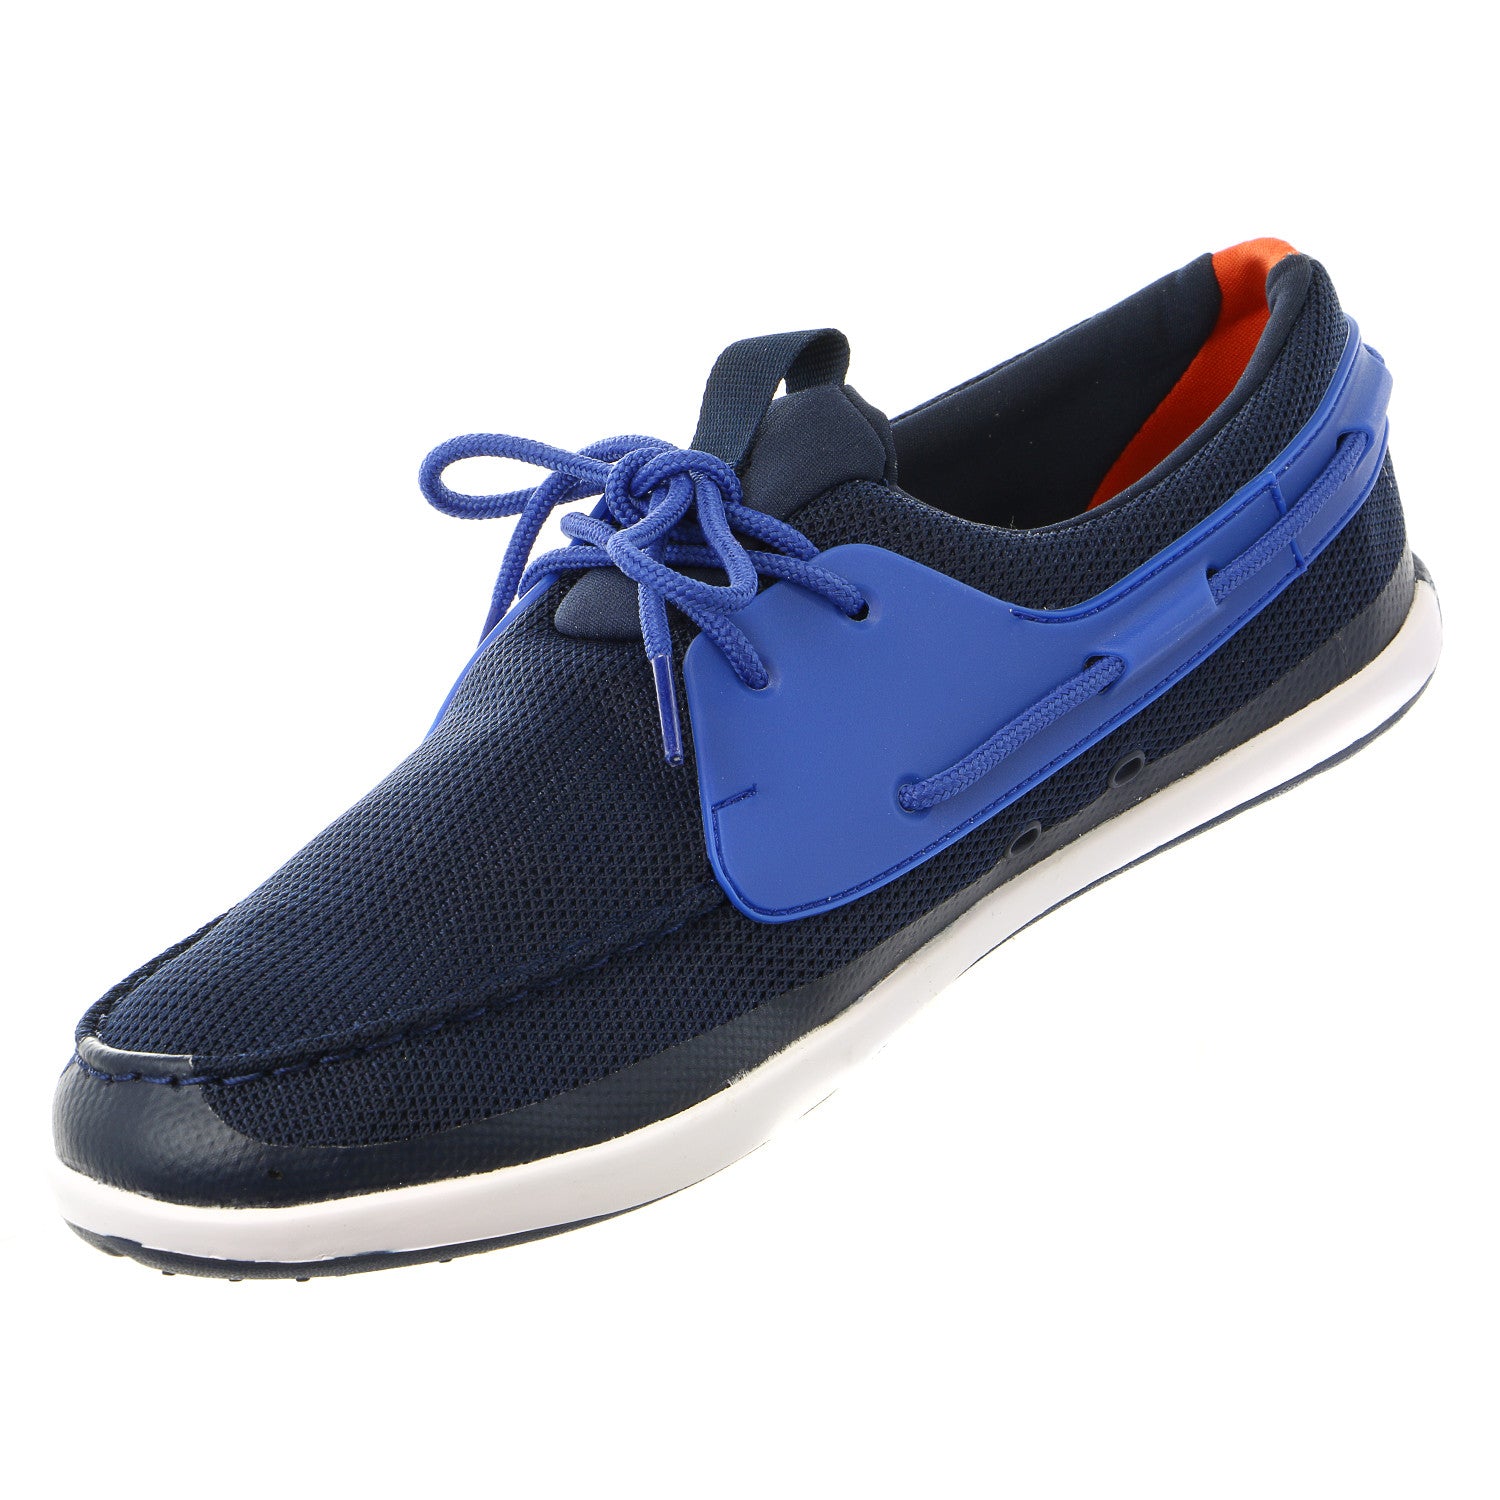 Zuivelproducten Ik wil niet Vrouw Lacoste L.Andsailing 116 1 Fashion Sneaker Moccasin Boat Shoe - Mens -  Shoplifestyle